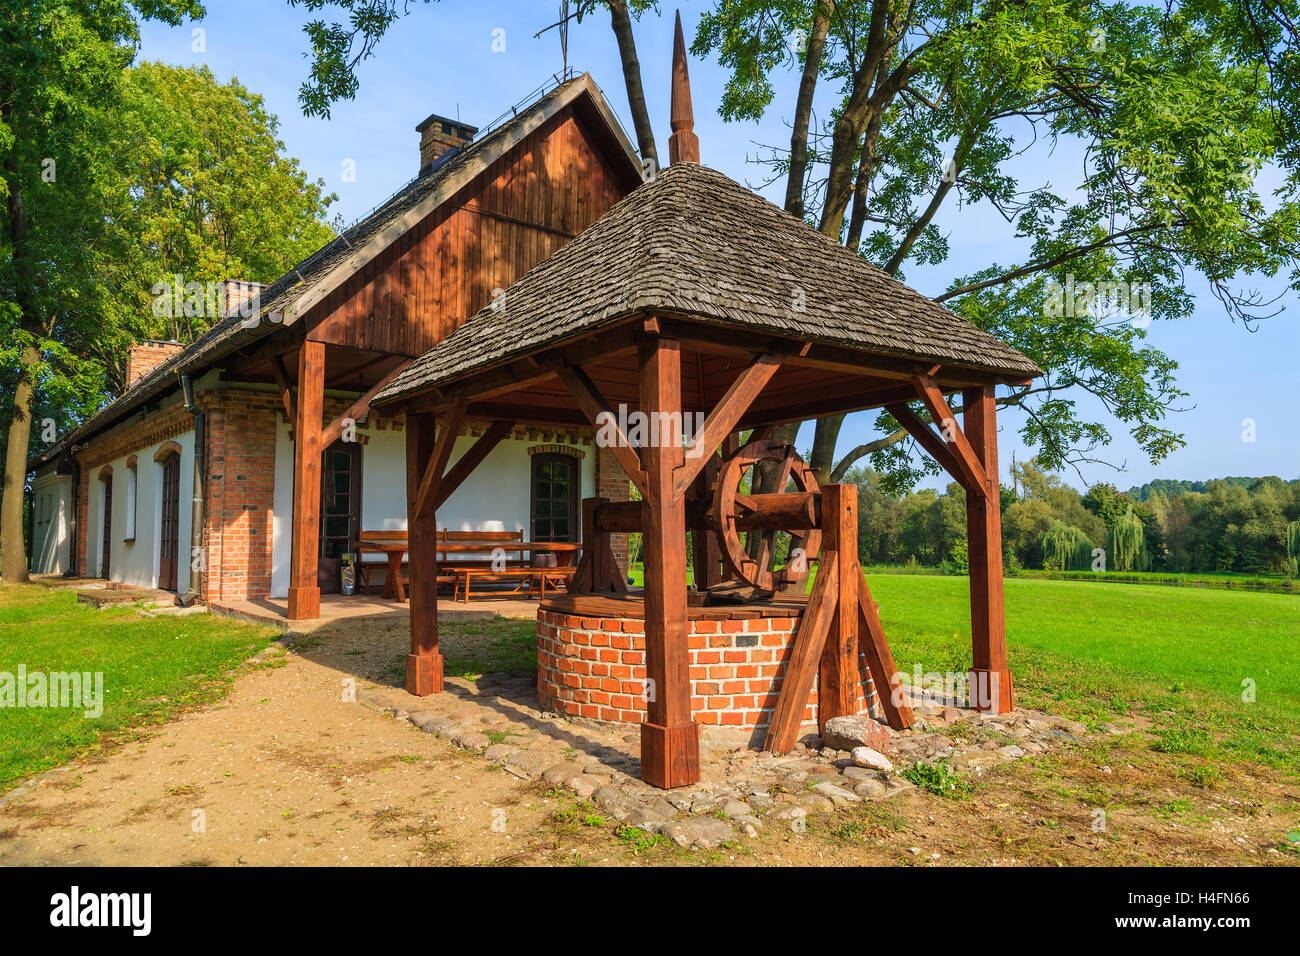 Water well of a traditional rural house in Radziejowice village on sunny summer day, Poland Stock Photo